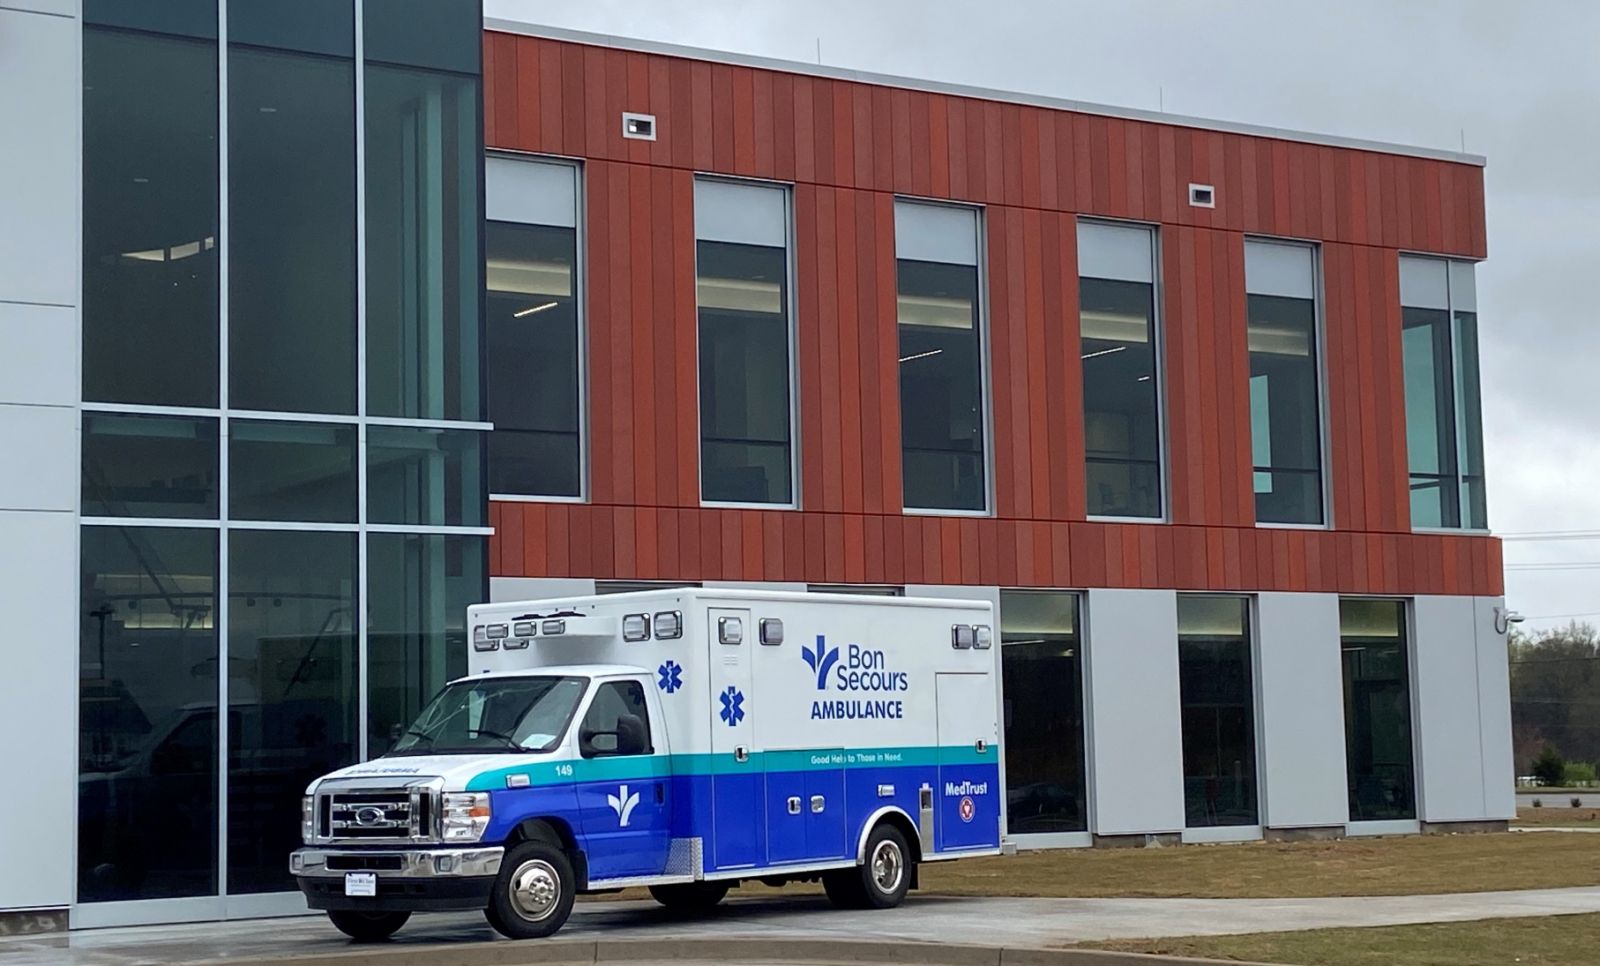 The Simpsonville campus' freestanding emergency department opened April 6. (Photo/Provided)